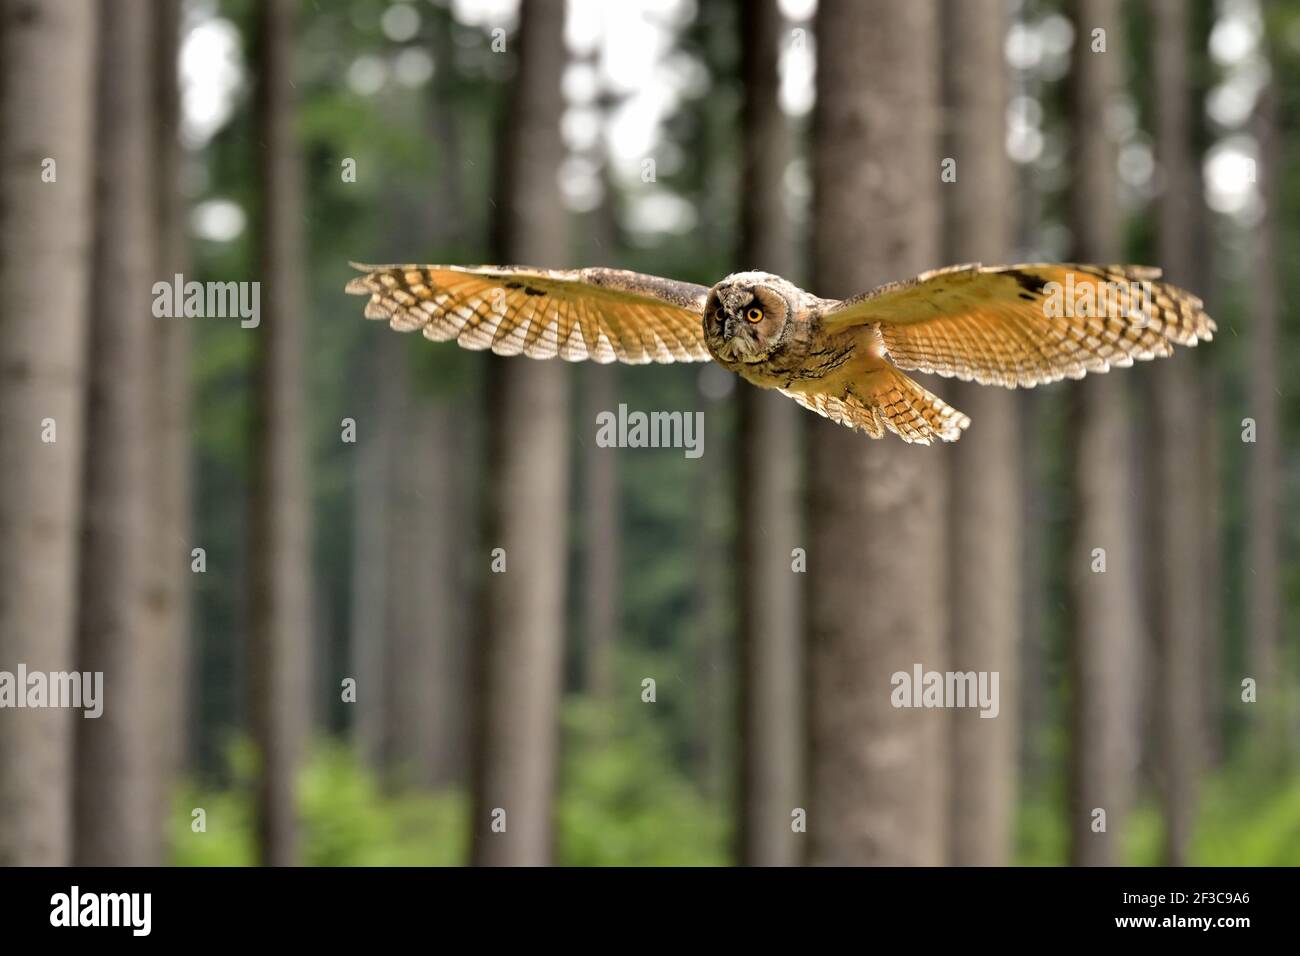 Owl in the Europe forest Stock Photo